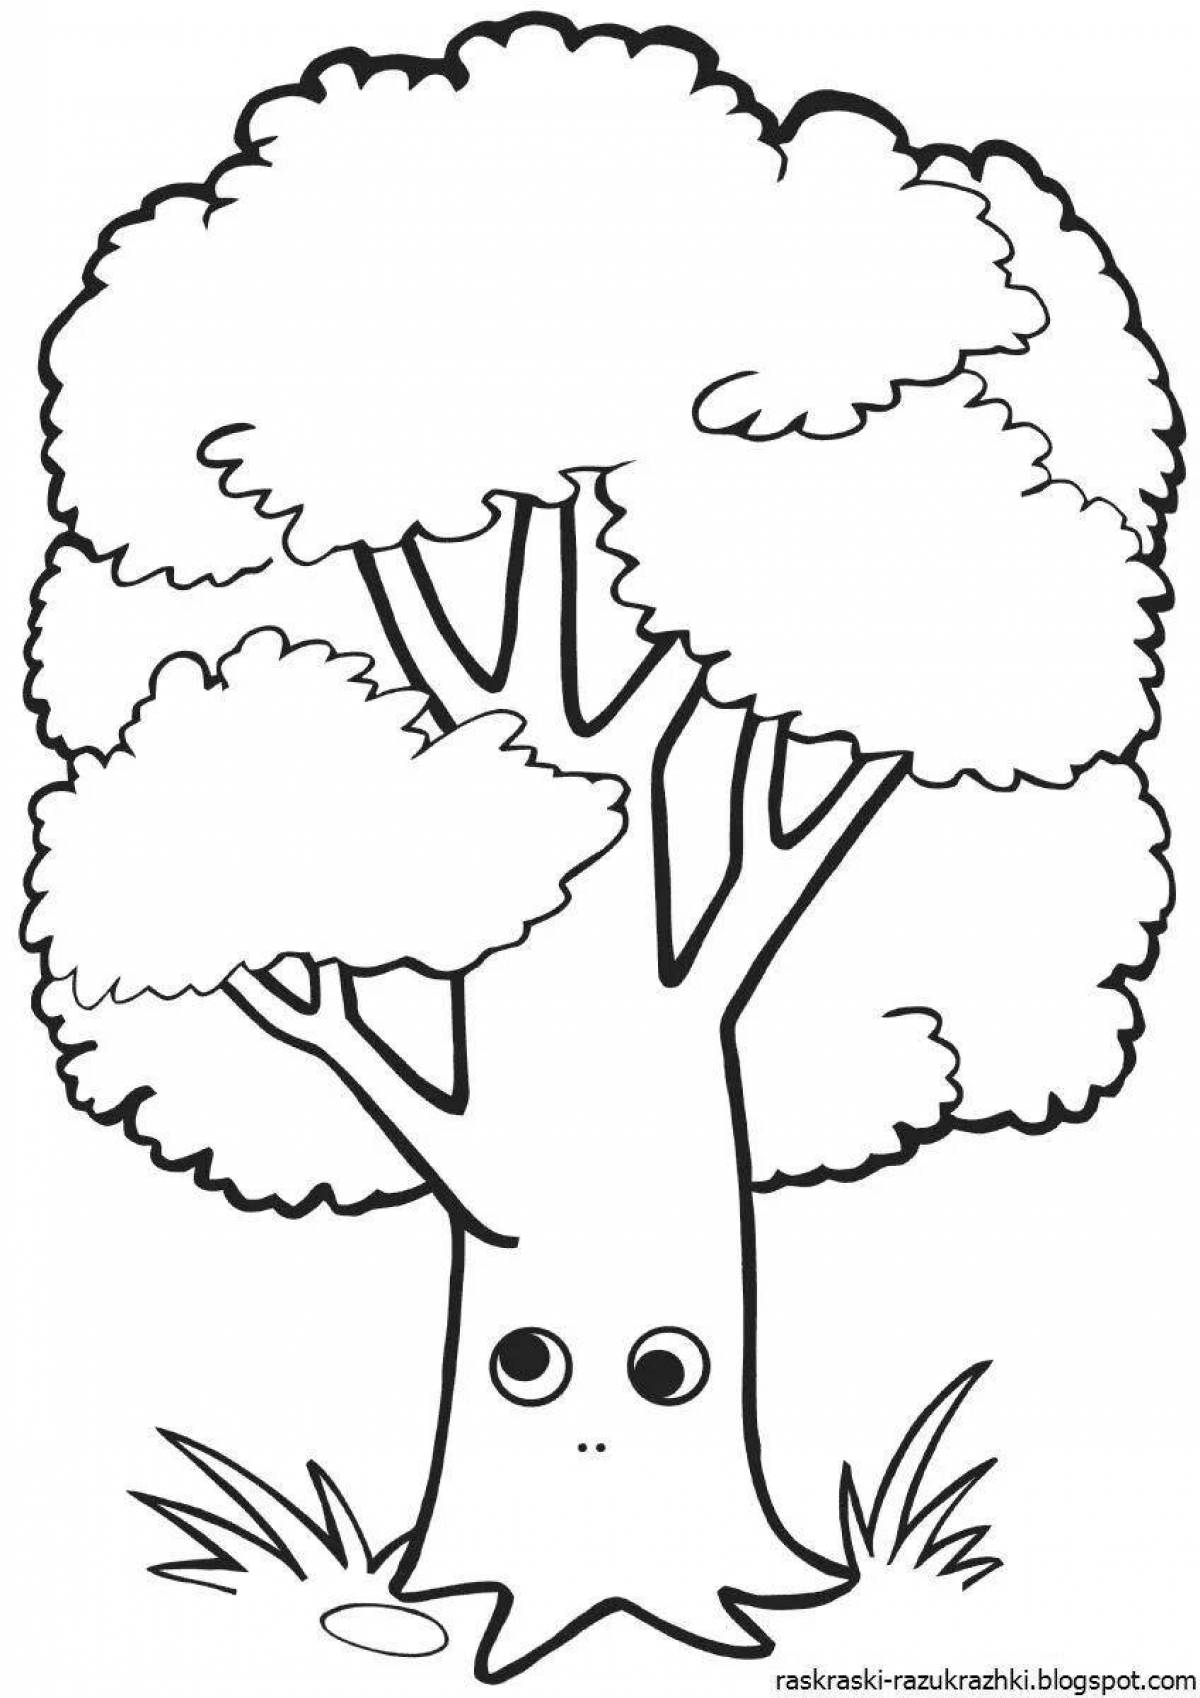 Coloring page of joyful tree for kids